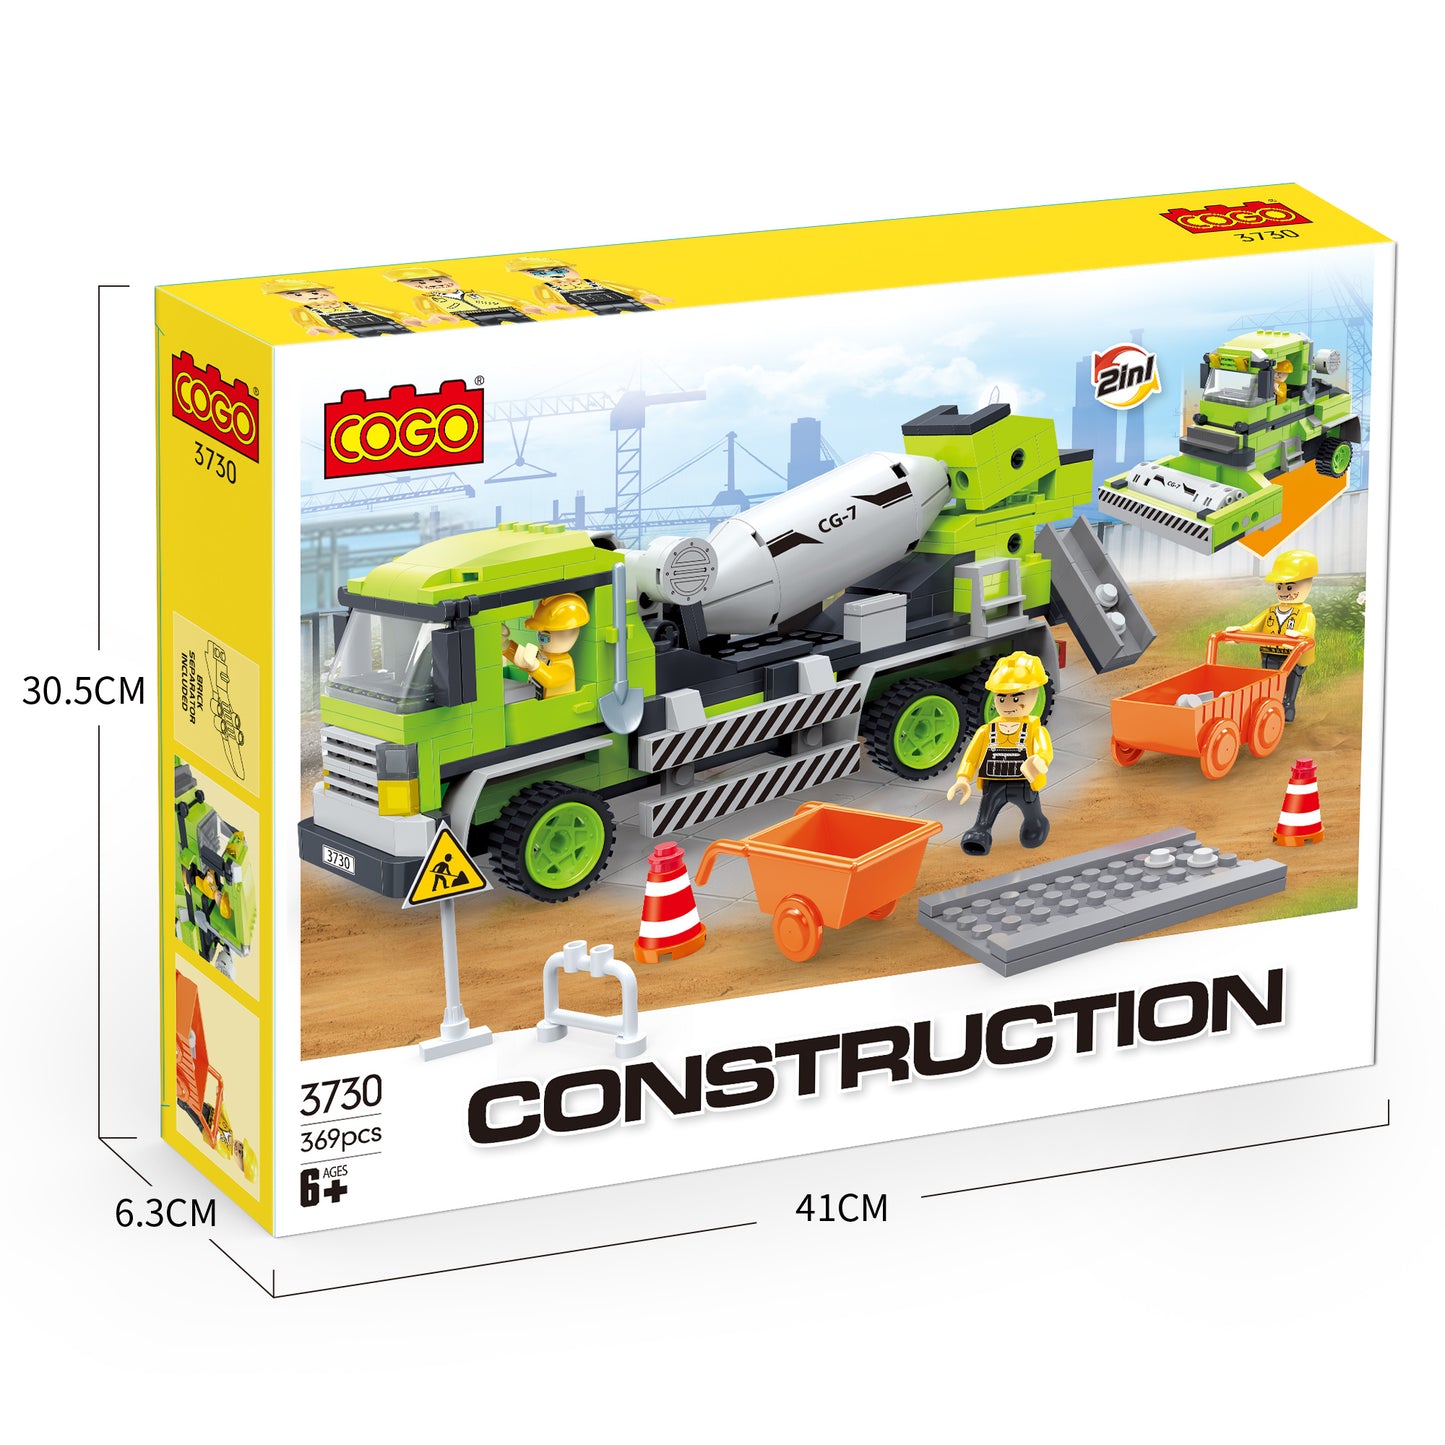 2-in-1 Construction Cement Truck